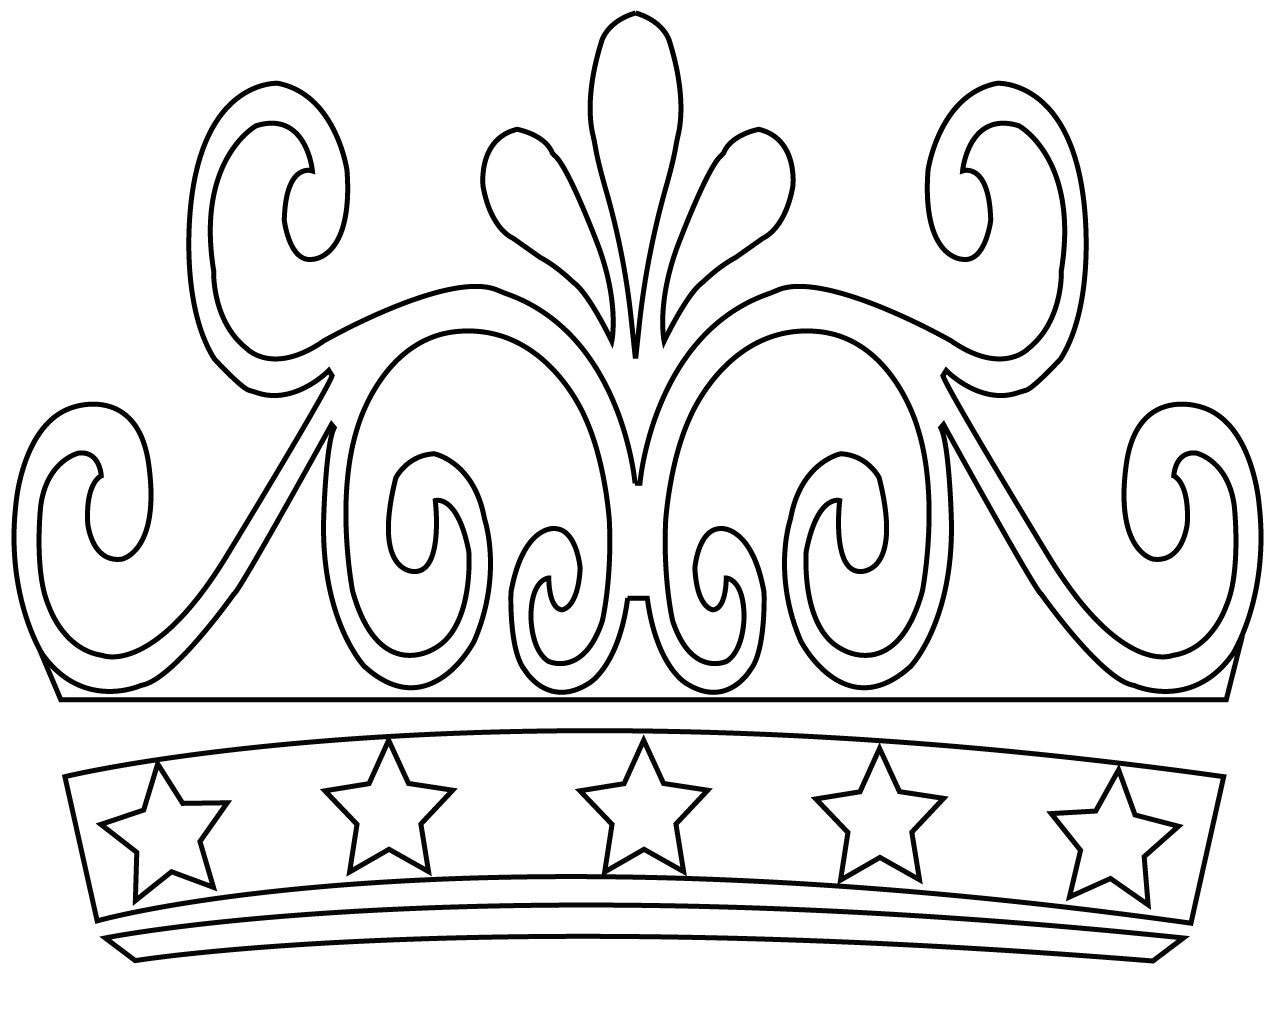 crown-coloring-pages-to-print-simple-birthday-princess-free-download